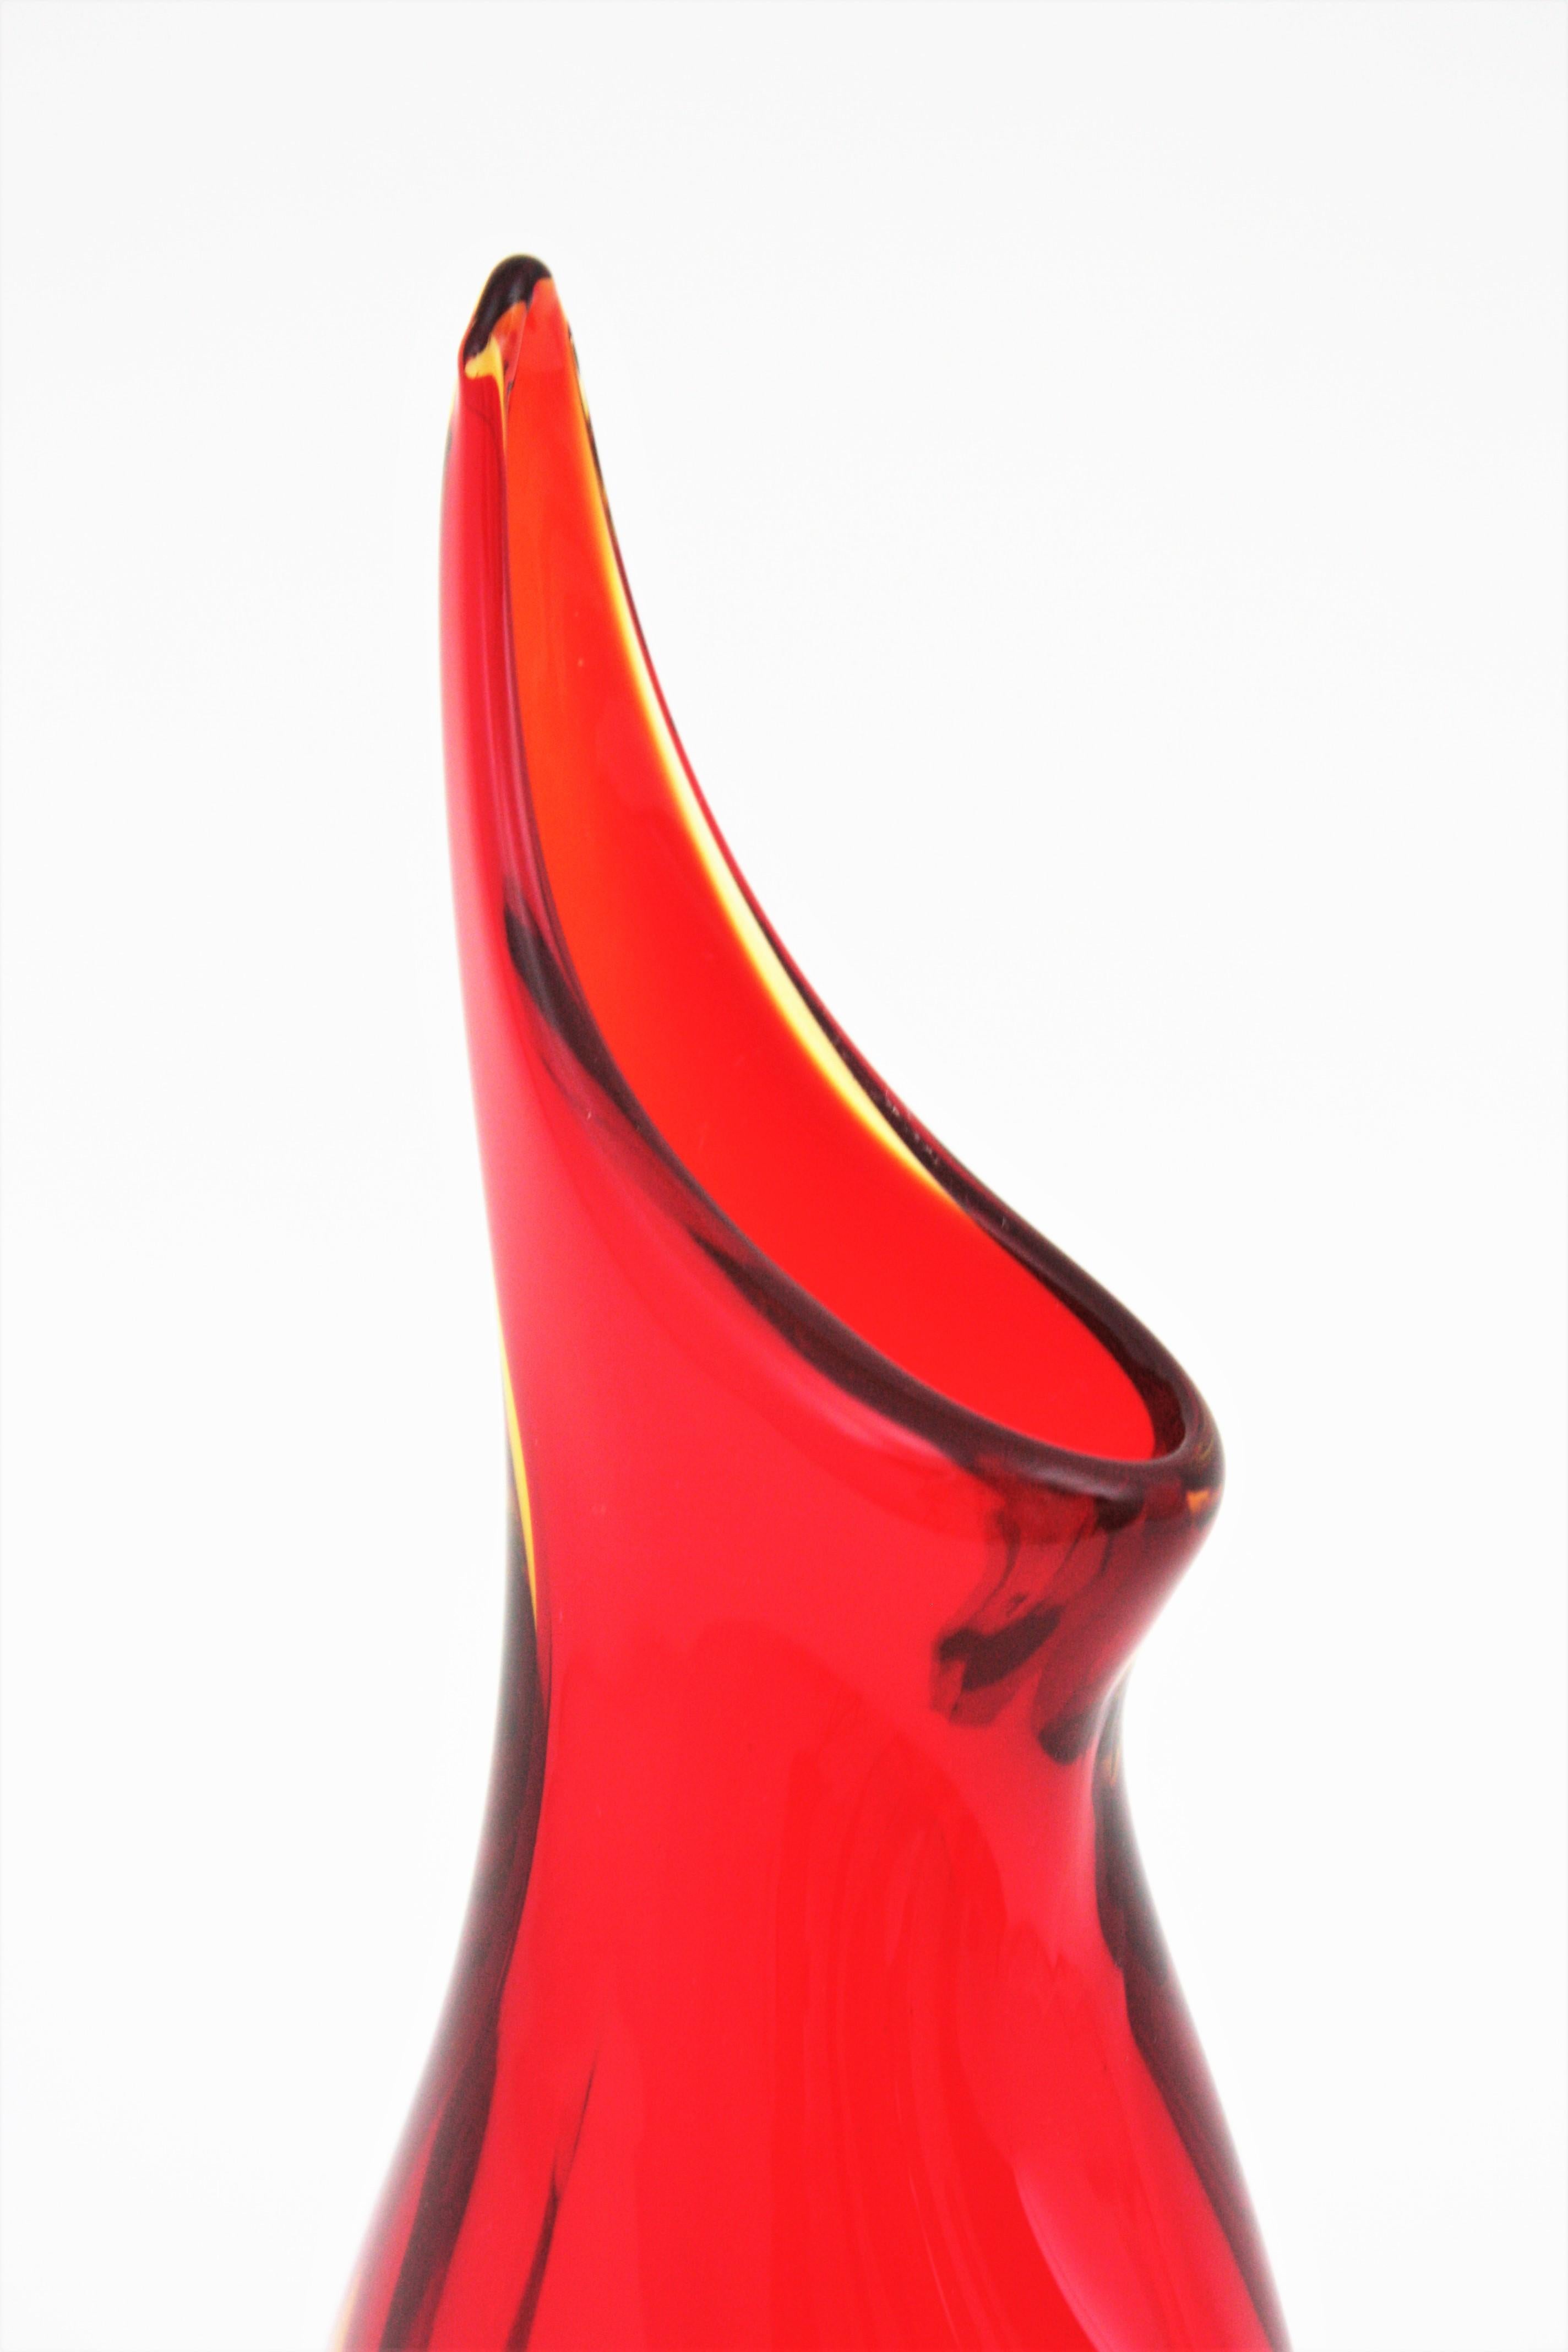 Hand-Crafted Flavio Poli Seguso Murano Red Yellow Sommerso Art Glass Vase For Sale